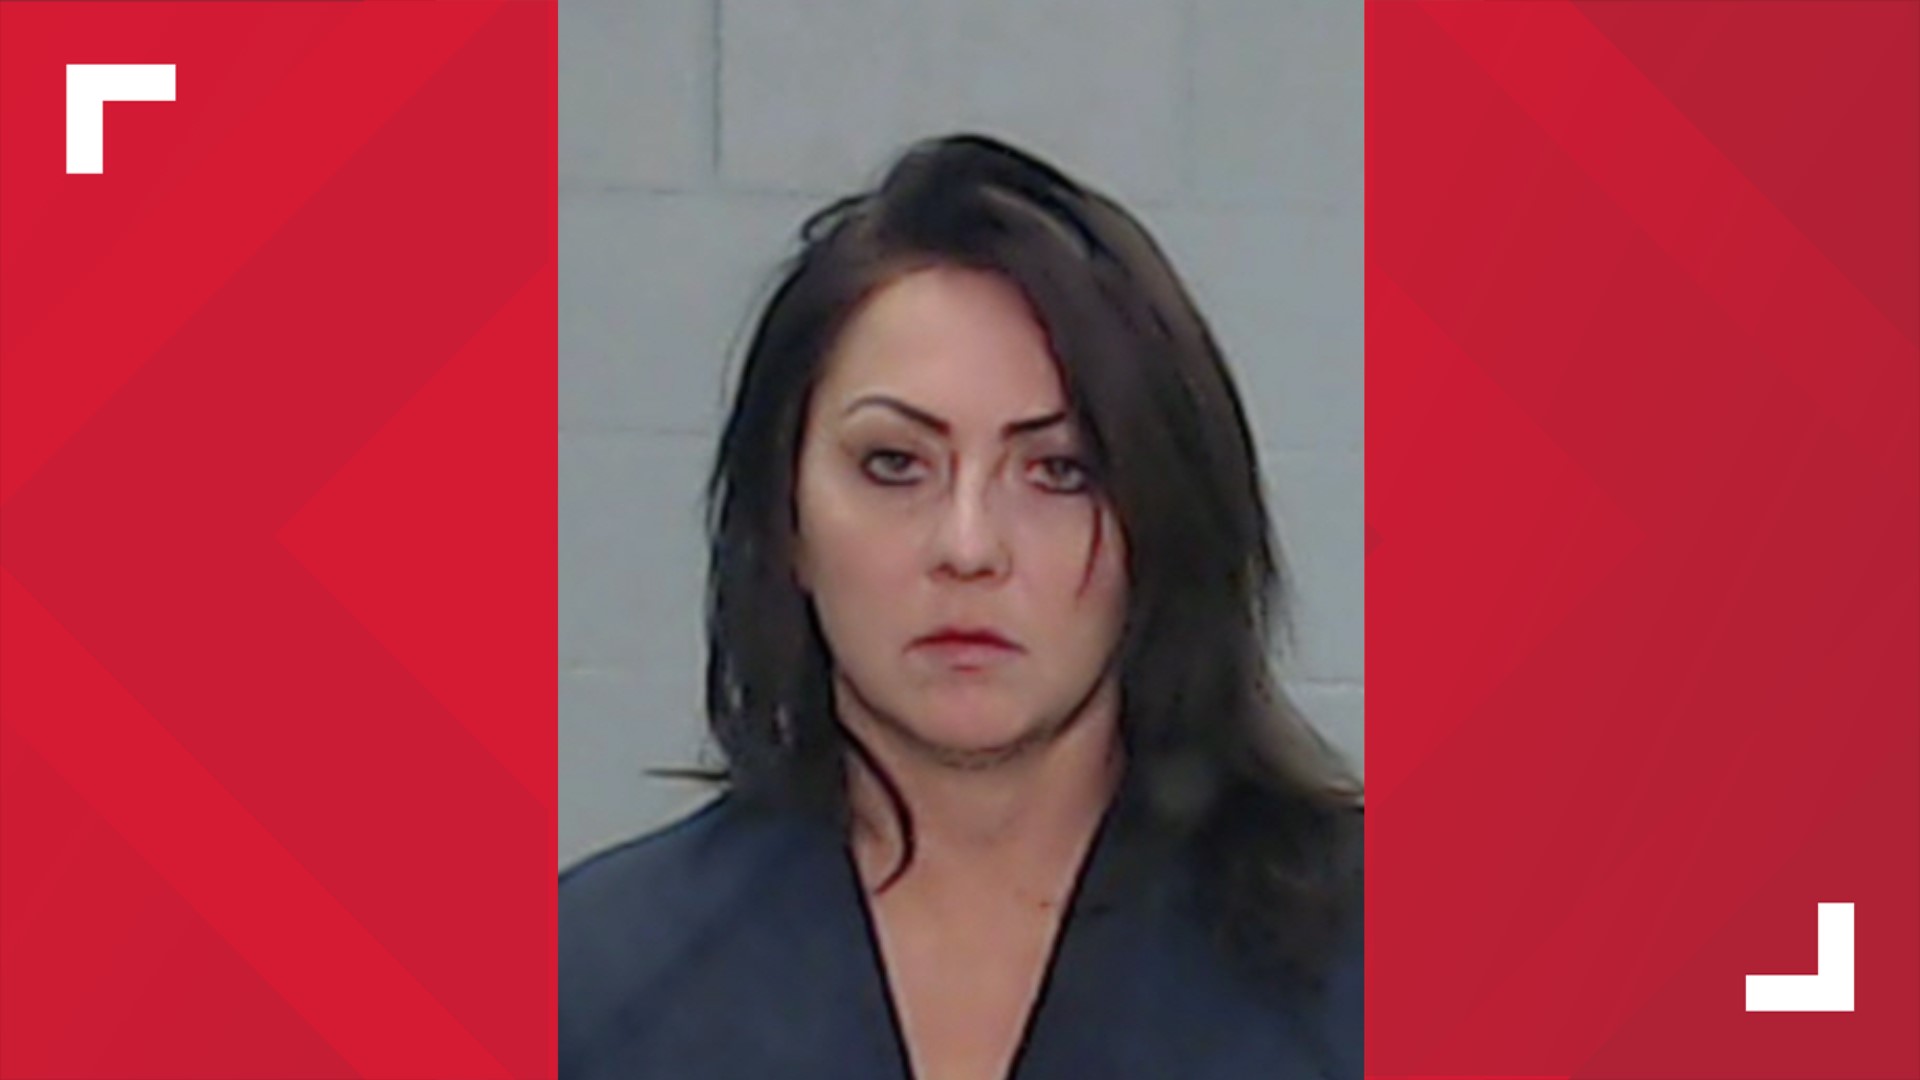 Courtney Rice was found guilty on manslaughter charges by an Ector County jury.